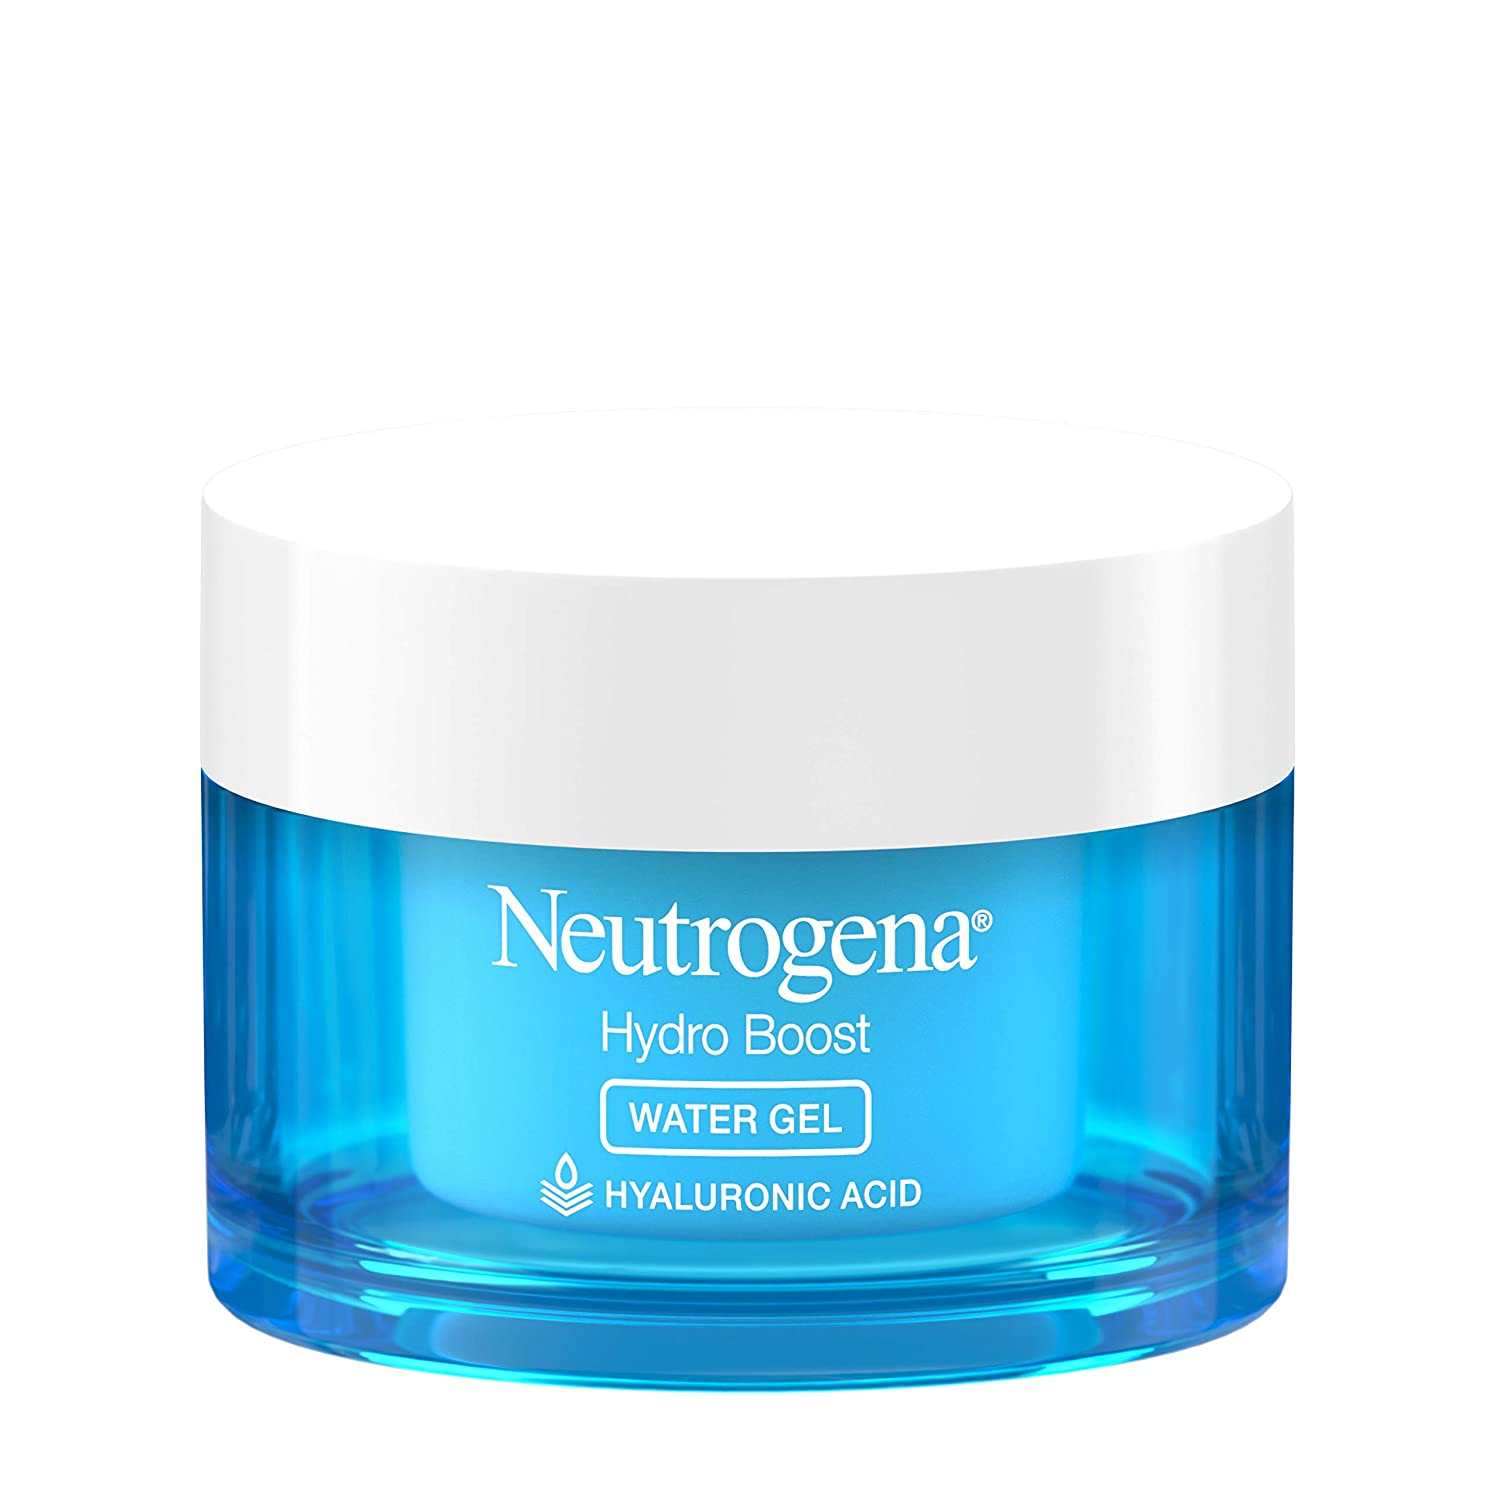 Neutrogena Hydro Boost Hyaluronic Acid Hydrating Water Face Gel Moisturizer for Dry Skin, Oil-Free, Non Comedog (Pack of 2) - image 2 of 6